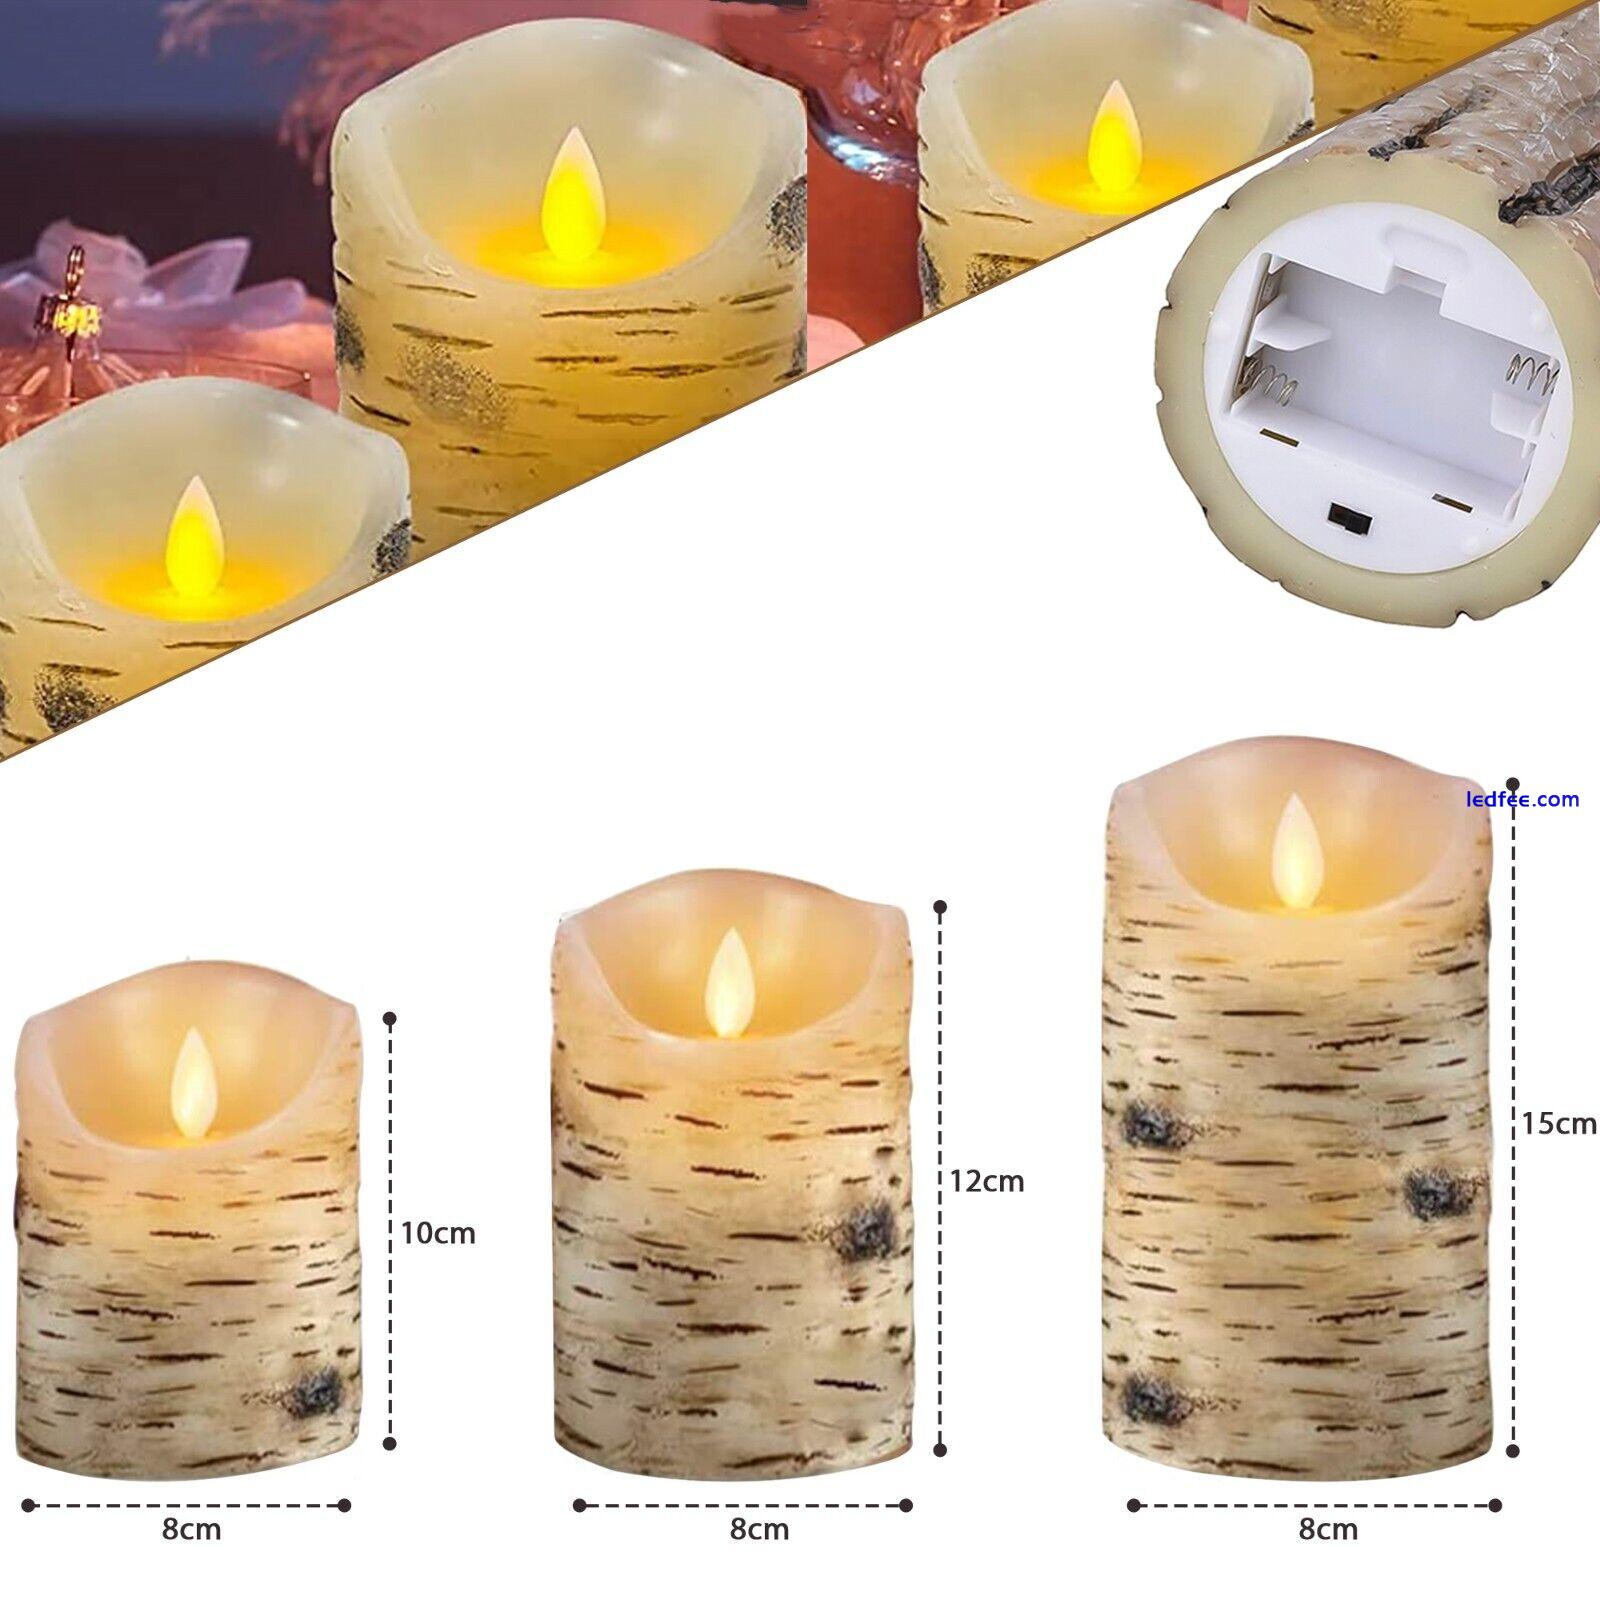 3 Set Flickering LED Candles Real Wax Battery Powered Lights Remote Control Lamp 5 